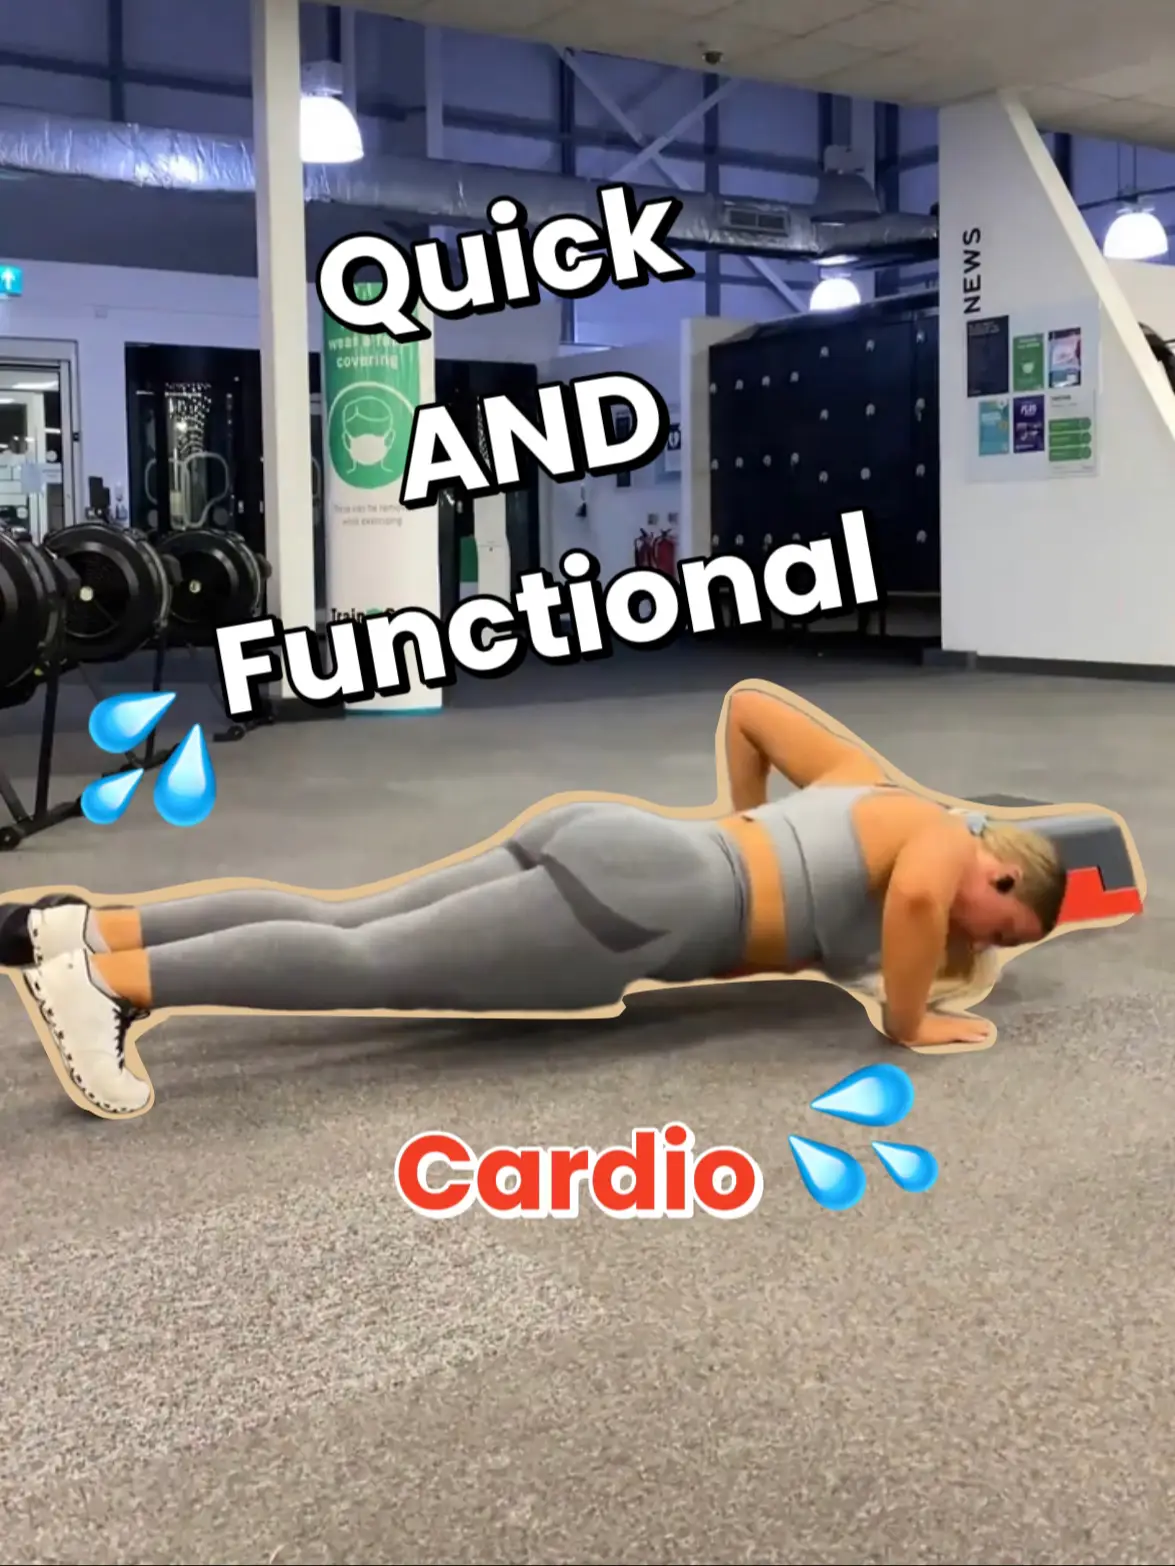 Quick AND Functional Cardio 💦, Video published by Lois 🌼